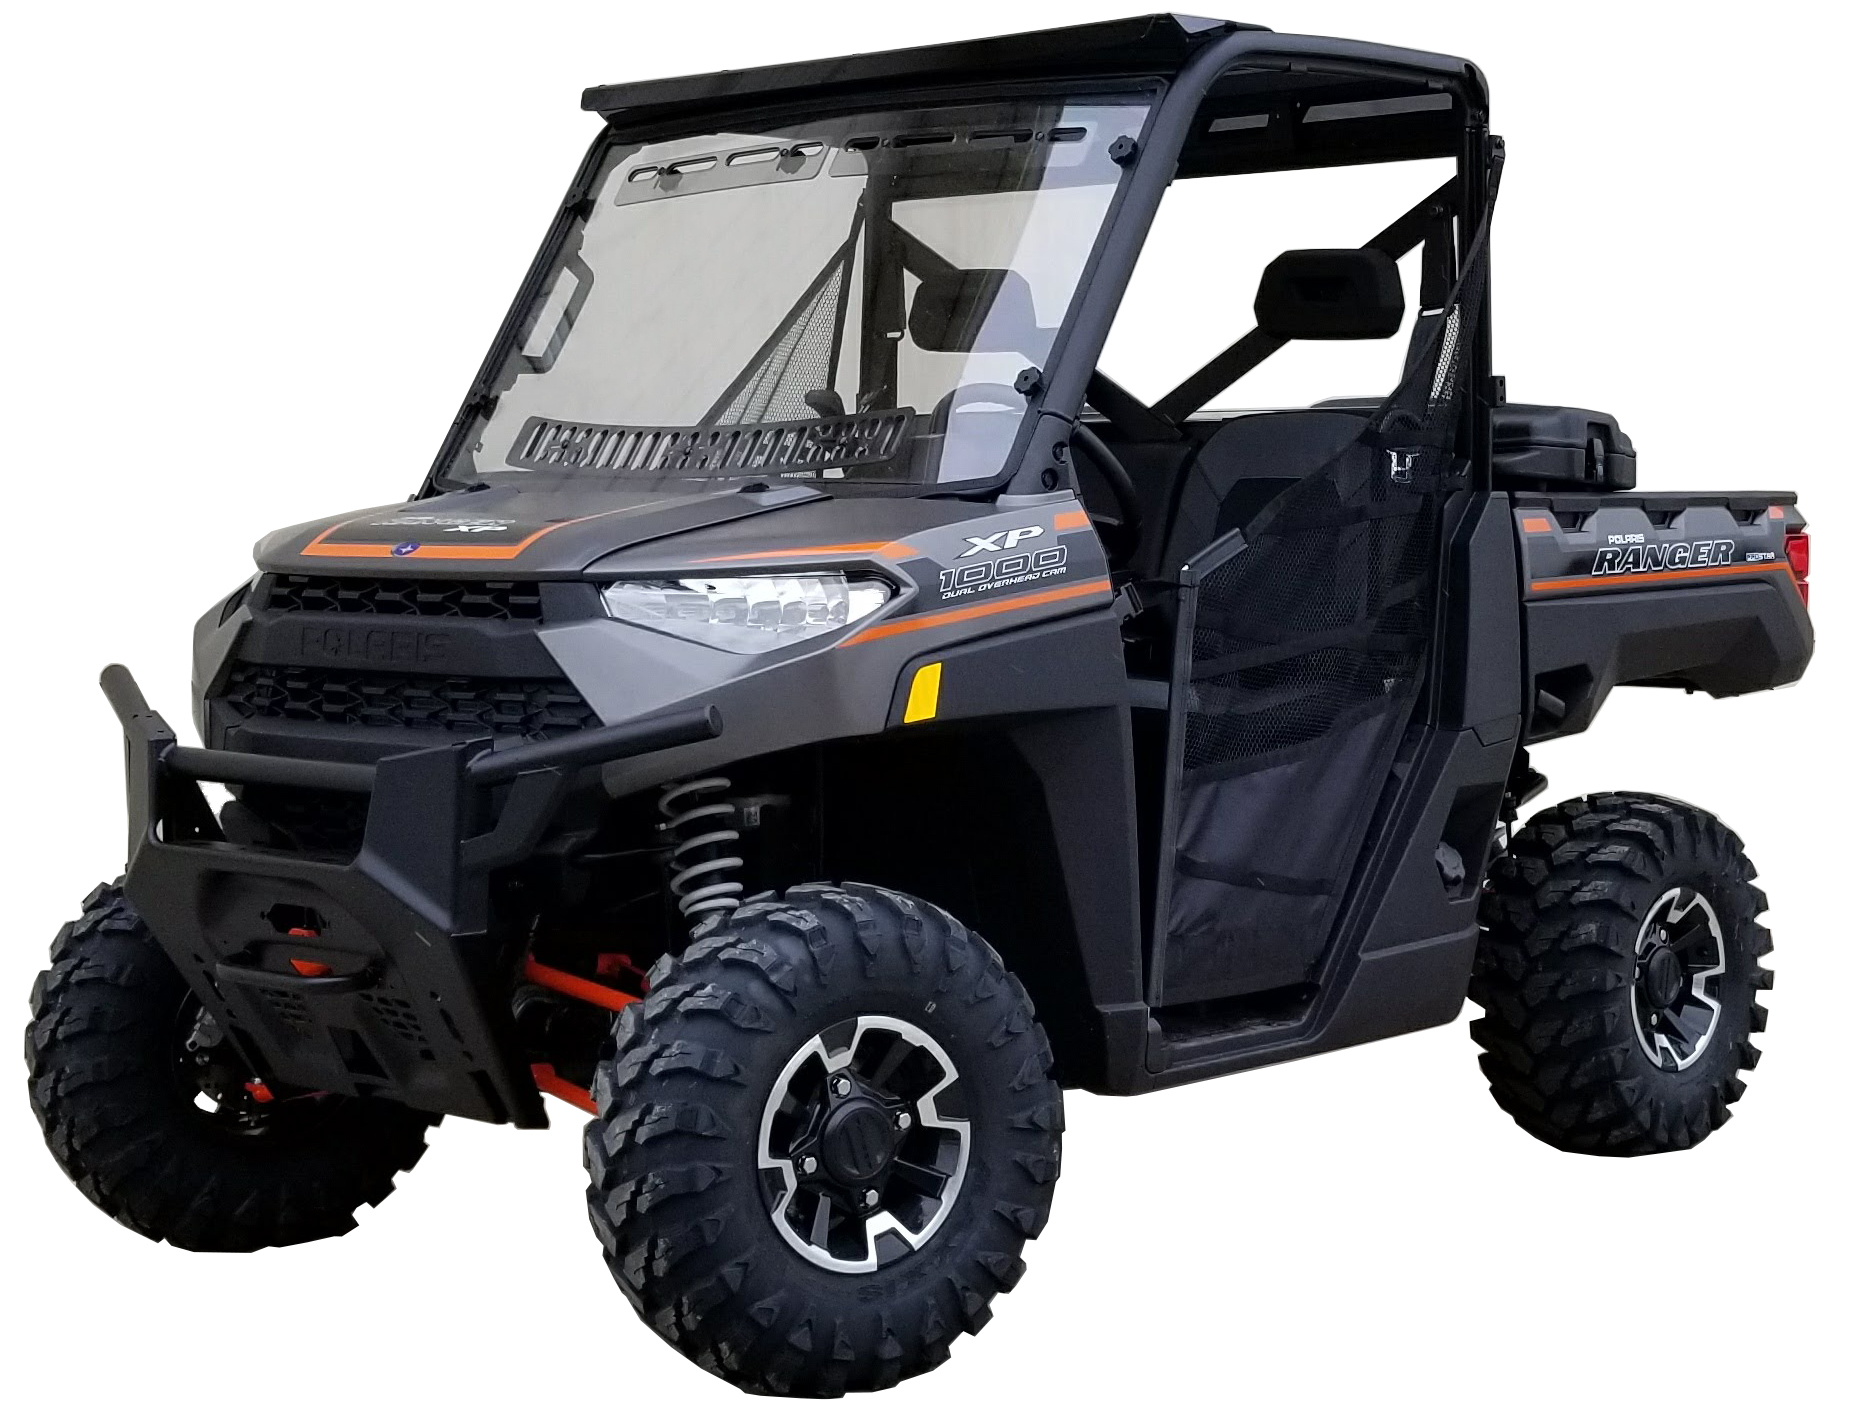 Full Windshield Dual Vent - For 13-17 Polaris Ranger w/ Profile Tubing - Click Image to Close